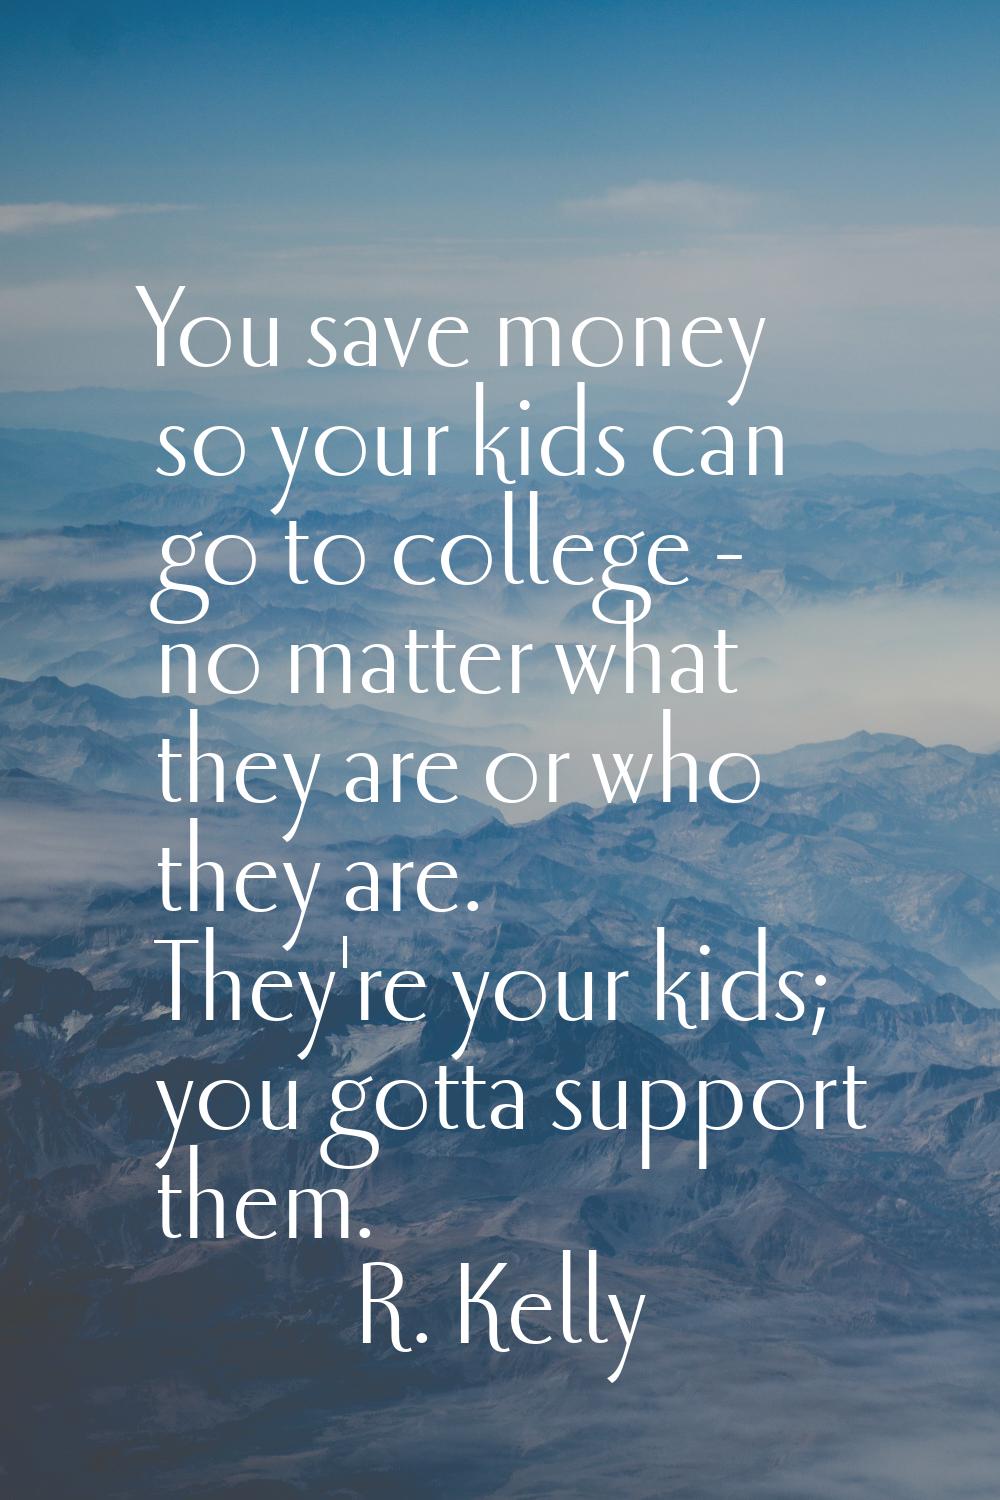 You save money so your kids can go to college - no matter what they are or who they are. They're yo